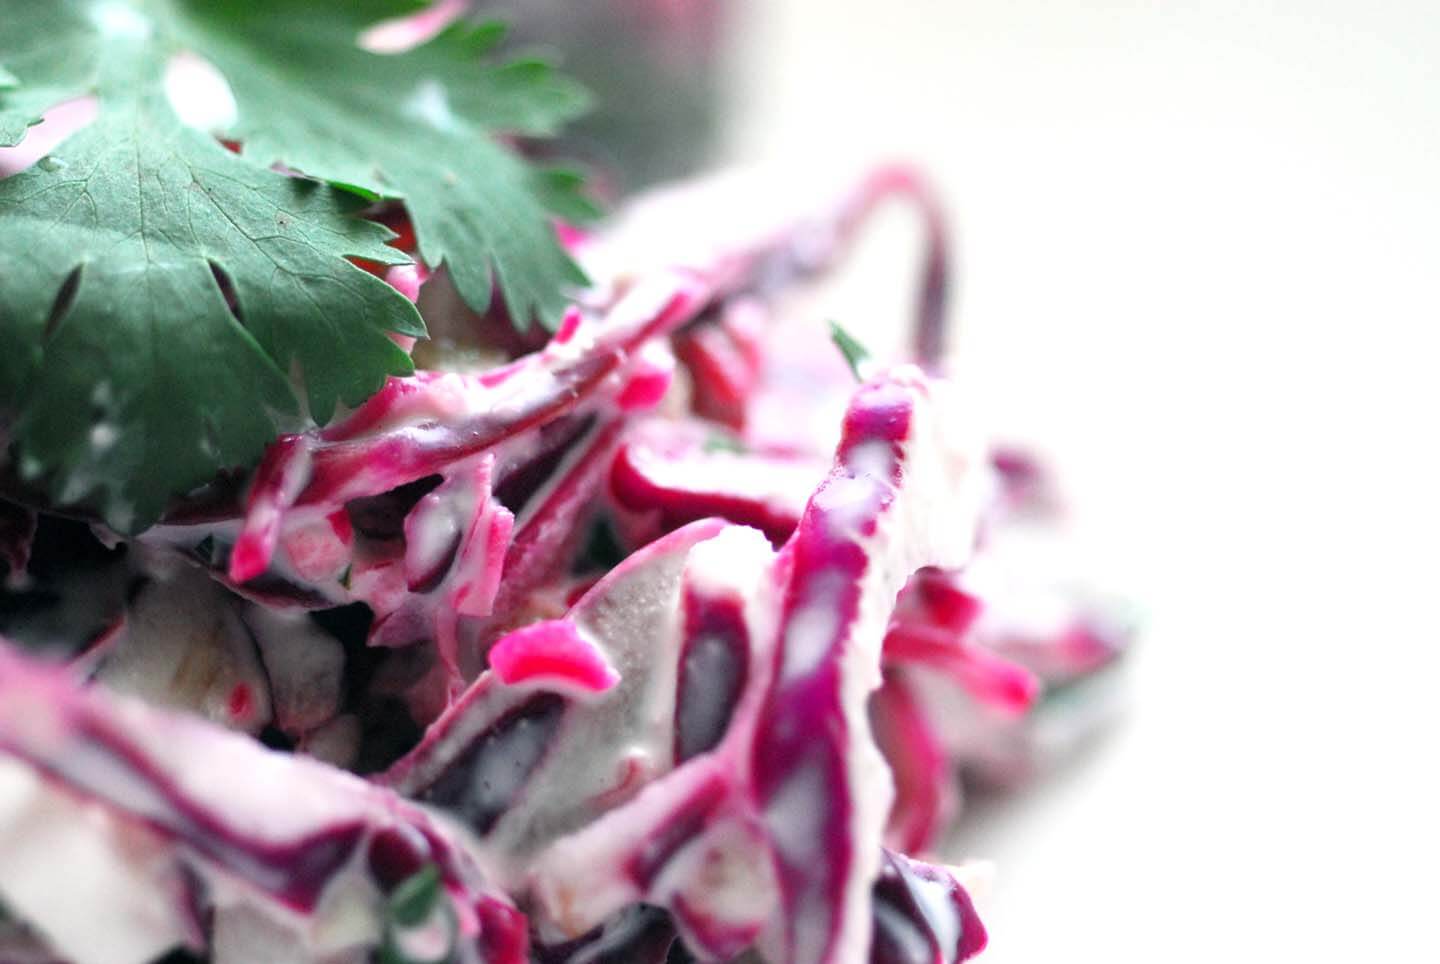 Coleslaw with cilantro and jalapenos | Homesick Texan